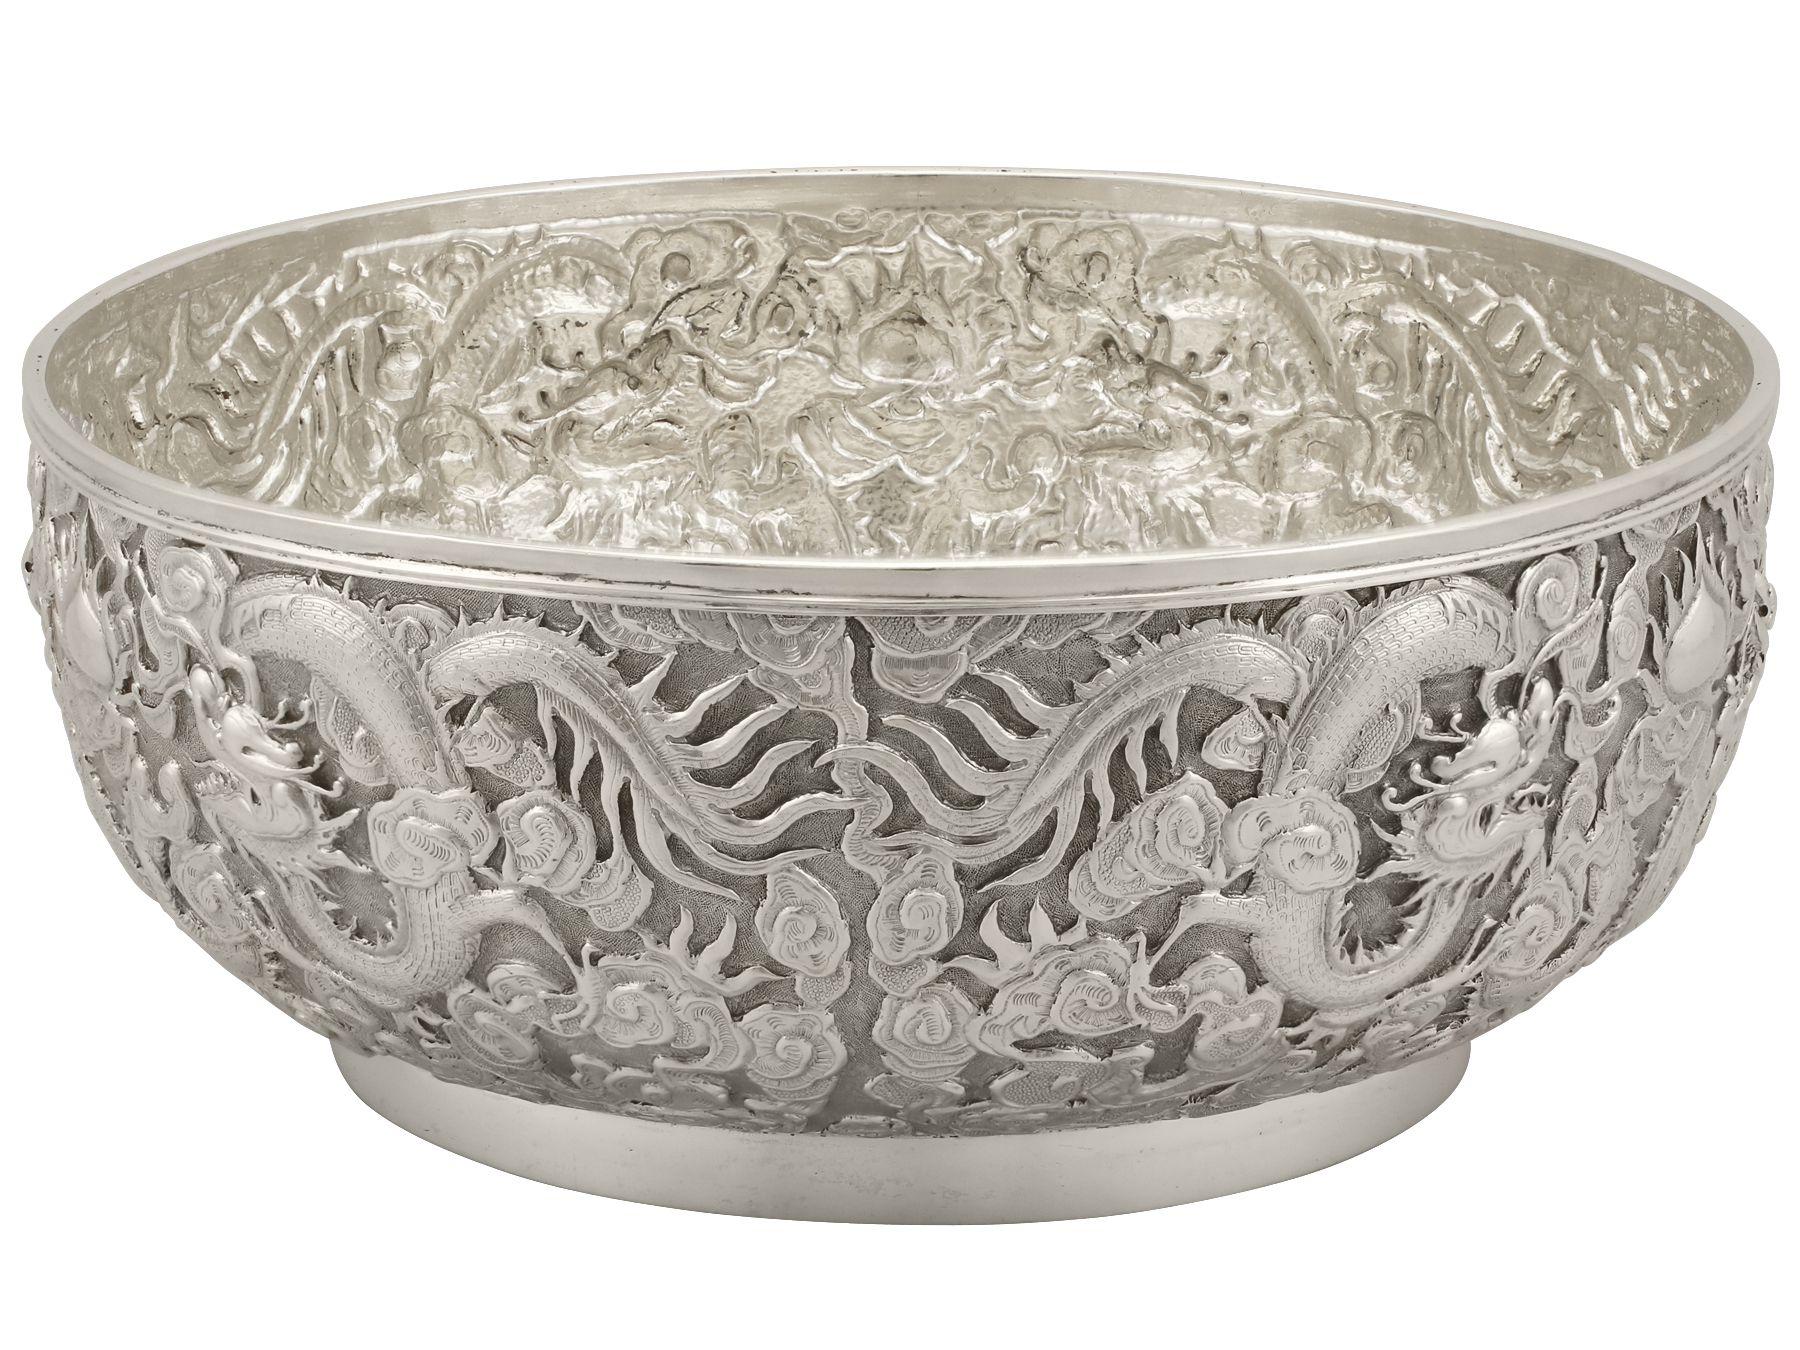 An exceptional, fine and impressive antique Chinese Export silver bowl; an addition to our Chinese/Asian silverware collection

This impressive Chinese Export Silver (CES) bowl has a plain circular form onto a plain collet foot.

The body of this